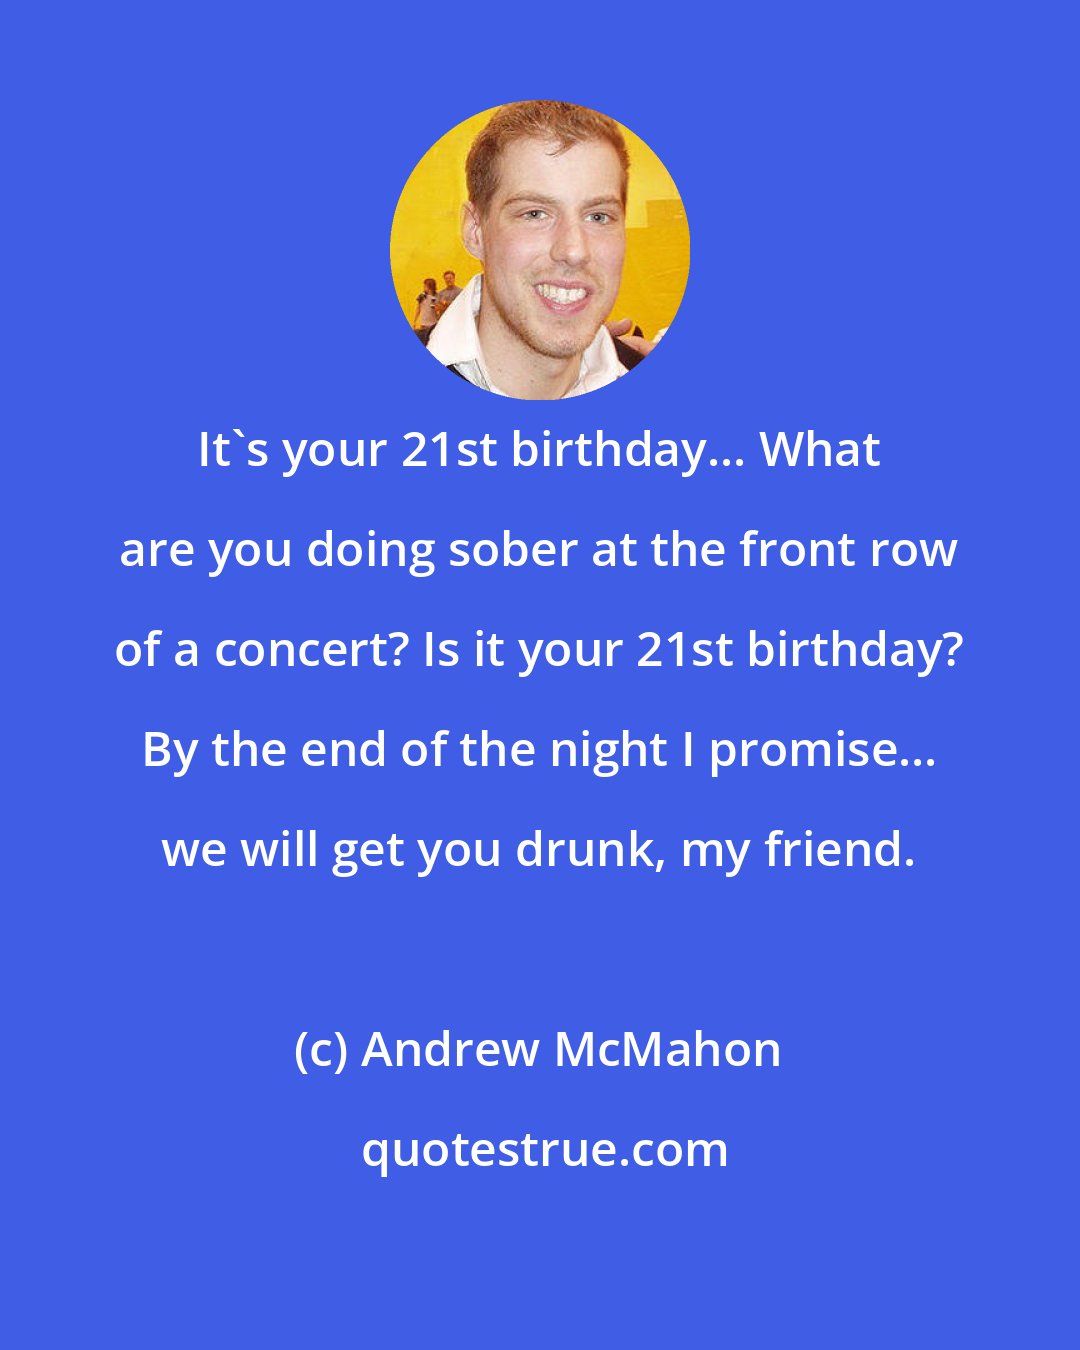 Andrew McMahon: It's your 21st birthday... What are you doing sober at the front row of a concert? Is it your 21st birthday? By the end of the night I promise... we will get you drunk, my friend.